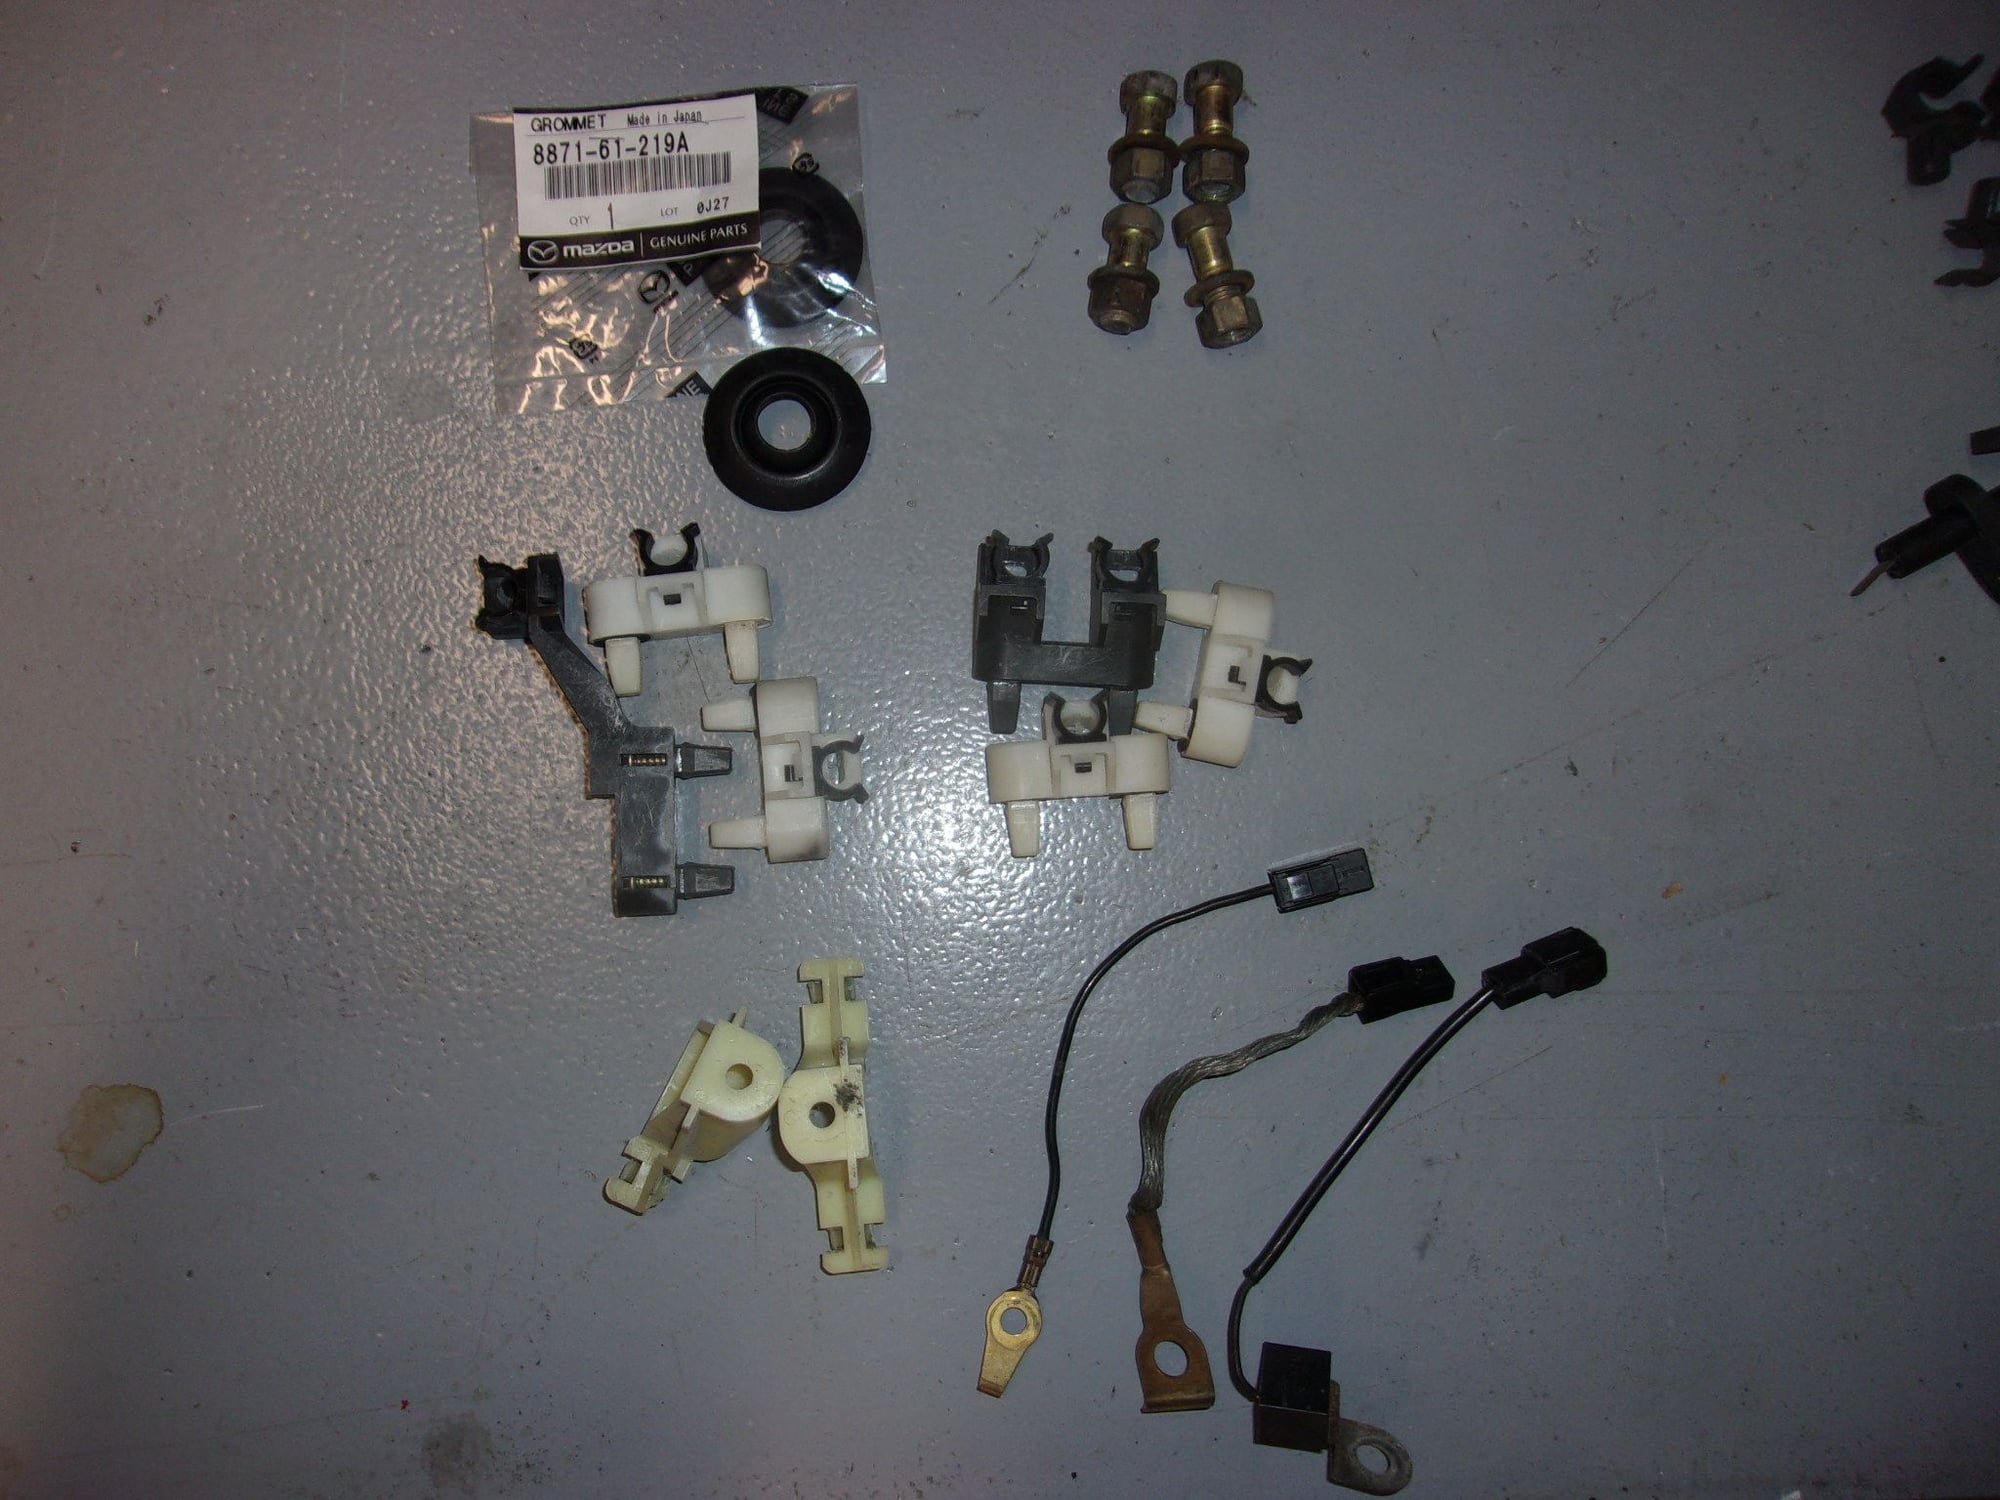 Miscellaneous - Hard-To-Find Parts #18 - Used - 1993 to 1995 Mazda RX-7 - Murfreesboro, TN 37130, United States